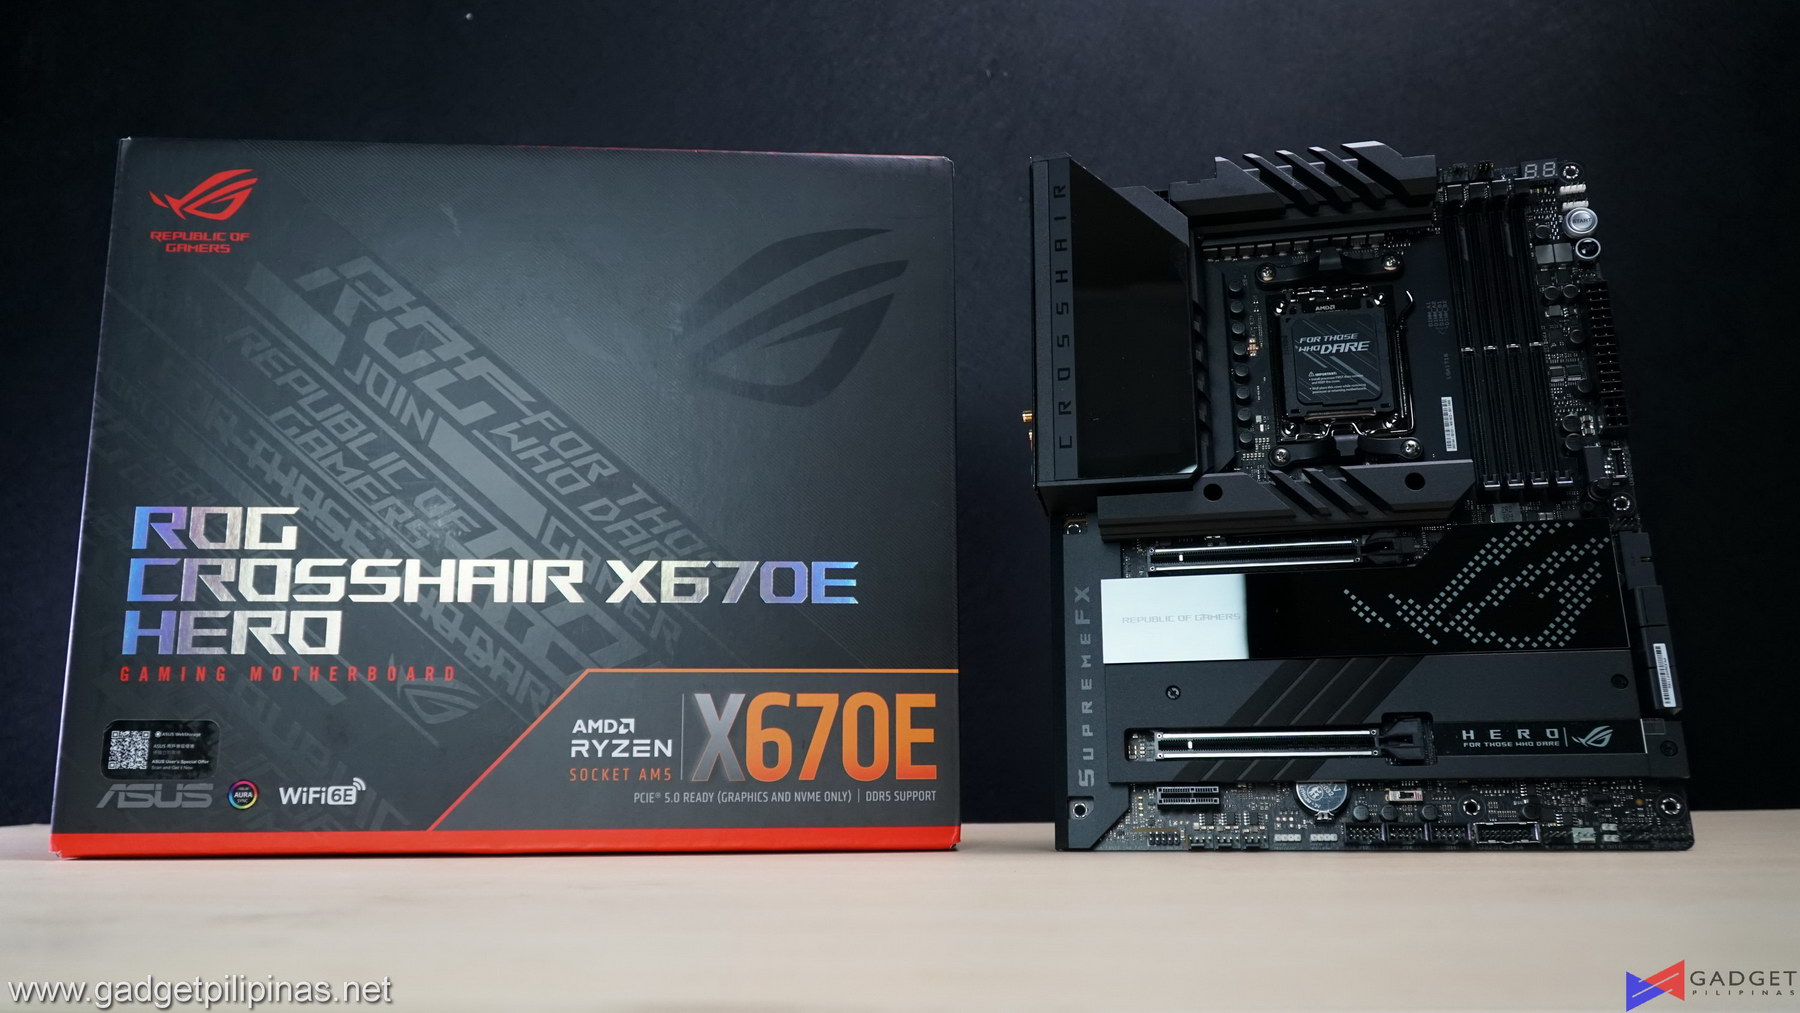 ASUS ROG Crosshair X670E Hero Motherboard Review – An AM5 Platform Investment